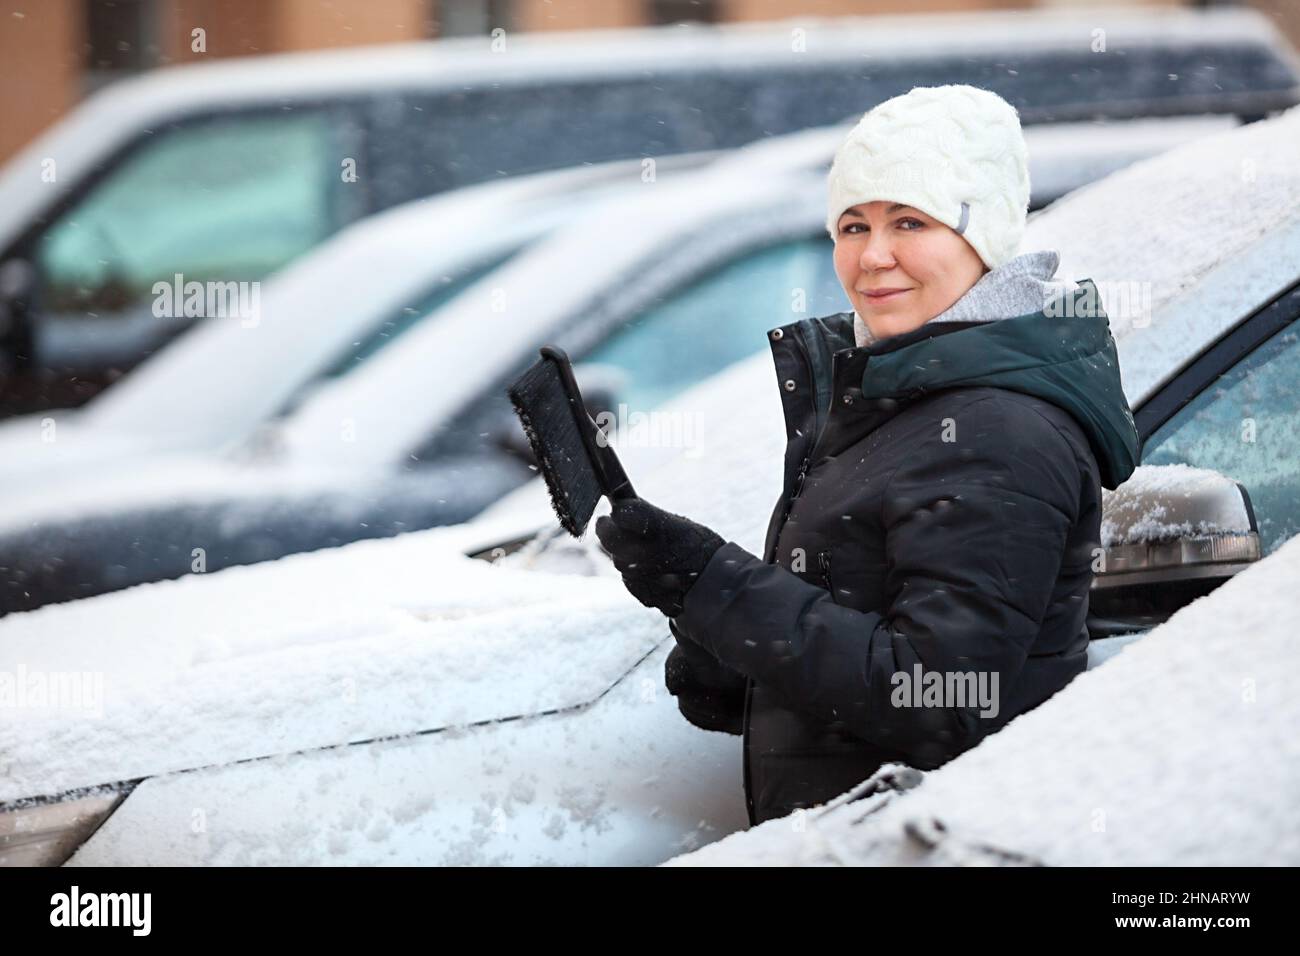 Female driver removes snow from the front of snowy car, woman looking at camera Stock Photo